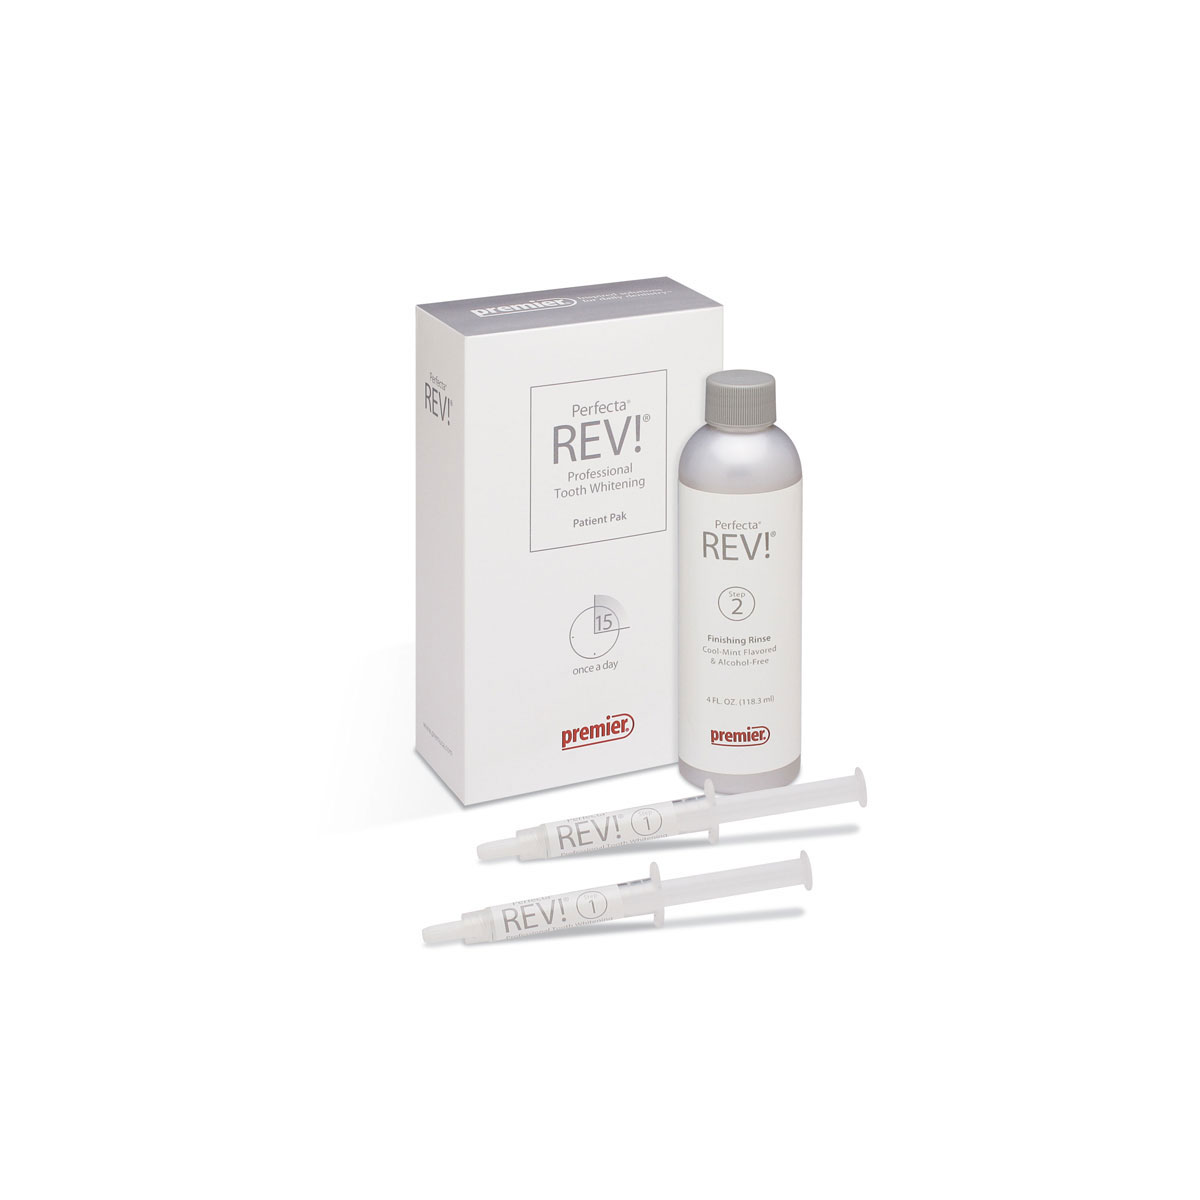 Perfecta REV! At Home Tooth Whitening Patient Pak 14% Hydrogen Peroxide